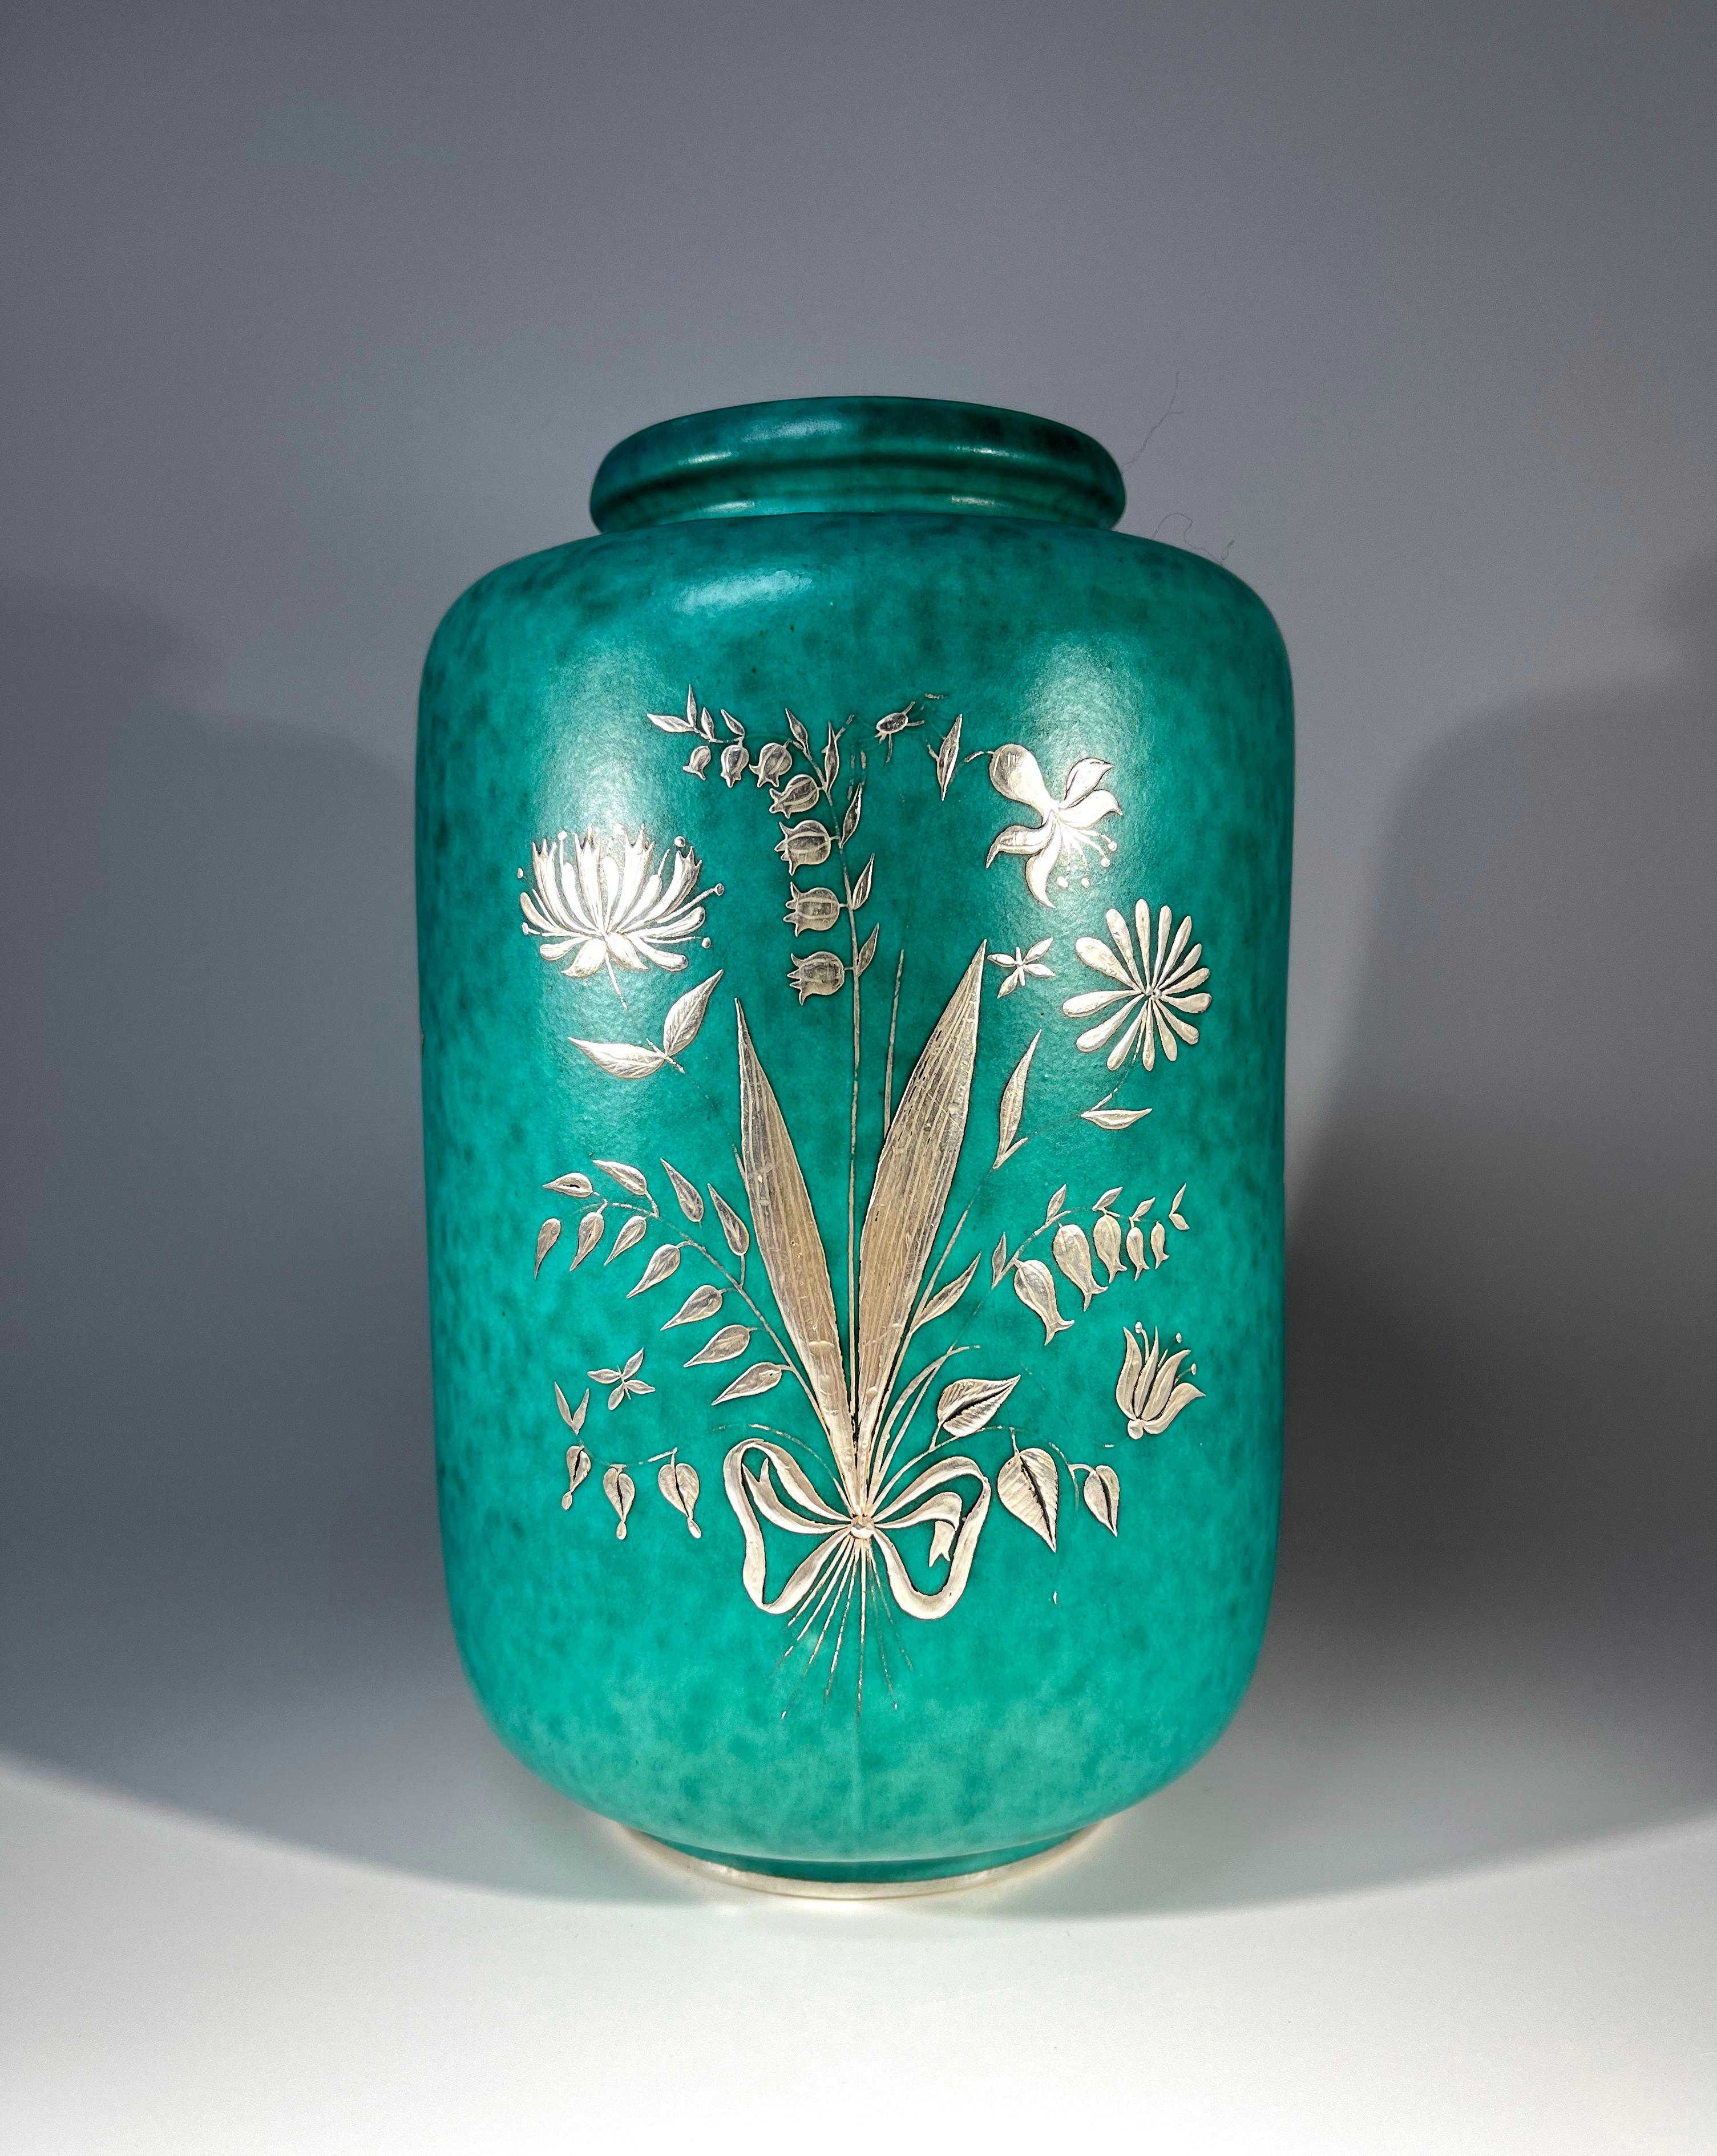 Delicate sprigs of wildflowers and tiny insects adorn this piece from the Argenta series by Wilhelm Kage for Gustavsberg, Sweden
Wonderful mottled glazed stoneware vase decorated with applied silver flora and fauna
Circa 1949 Date letter S.
Base